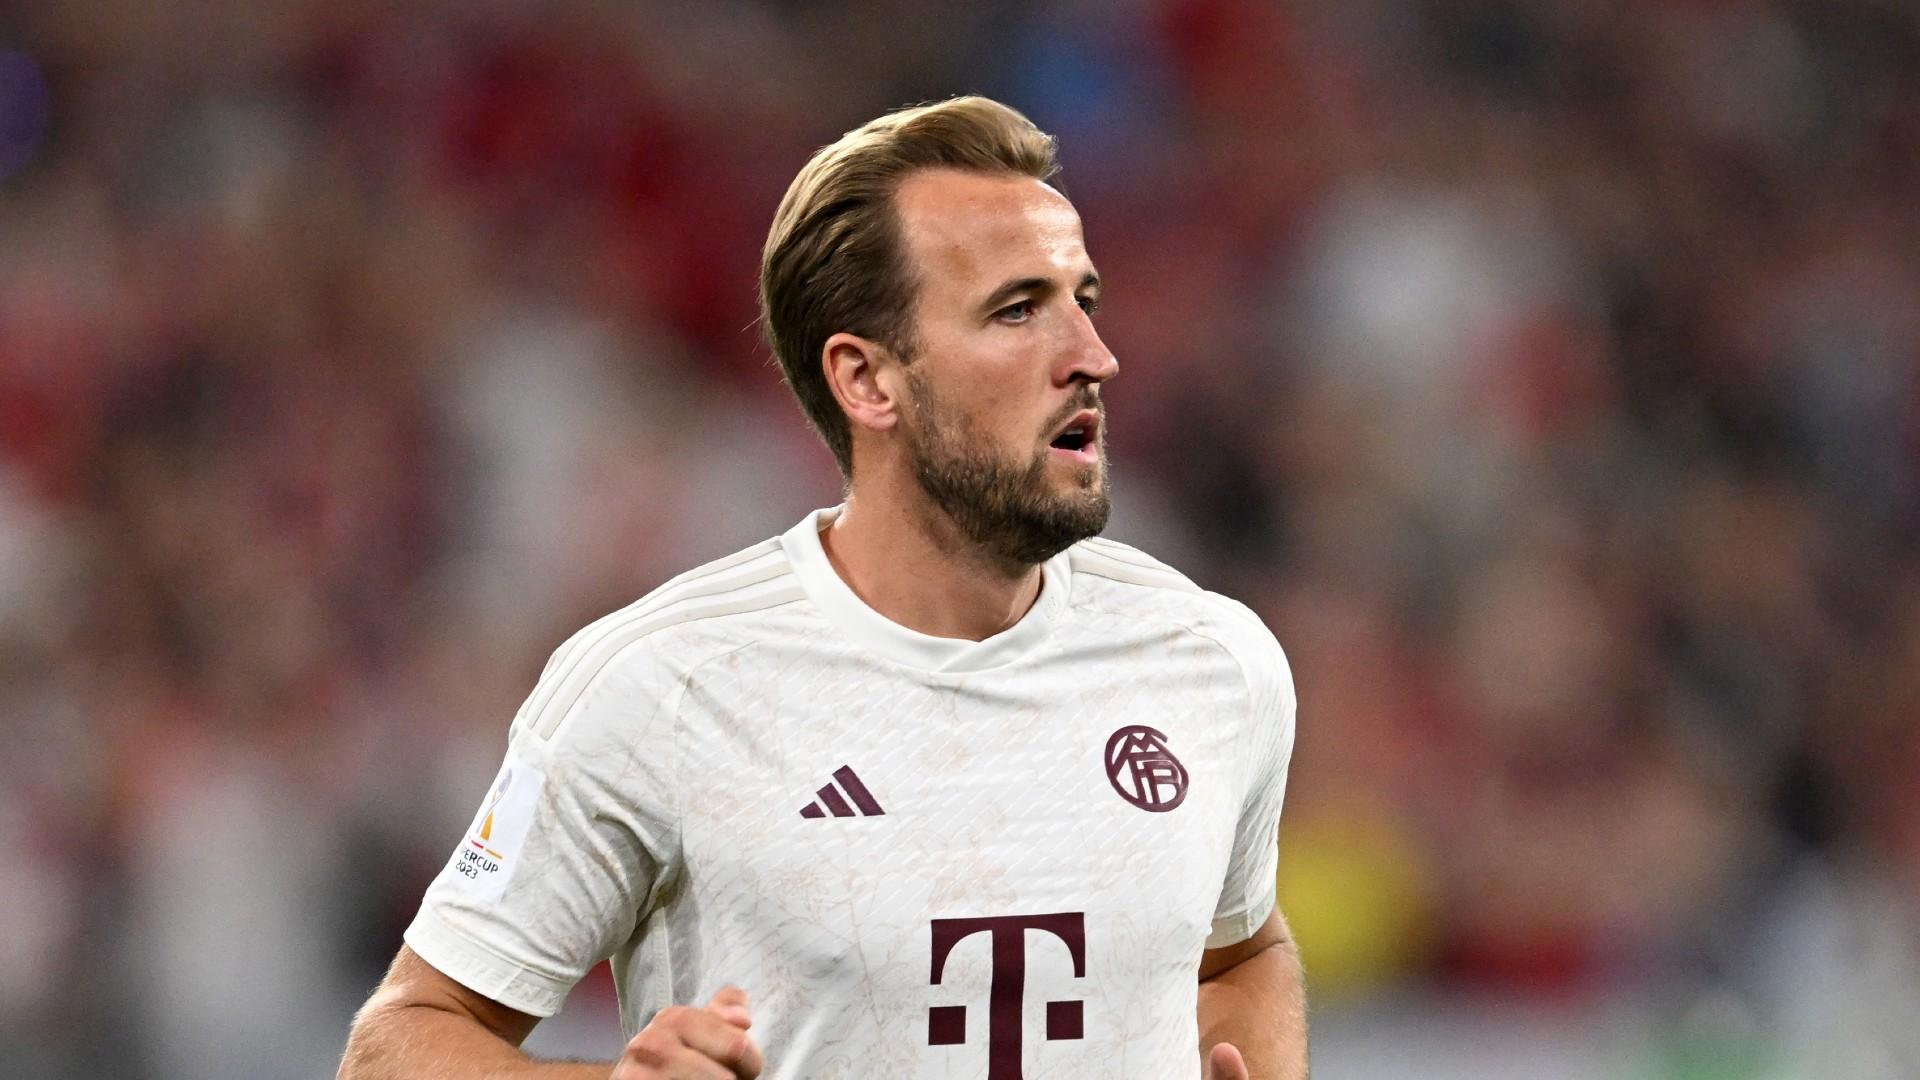 Former England international says everyone back home laughs at Bayern Munich star Harry Kane’s inability to win silverware - Bóng Đá